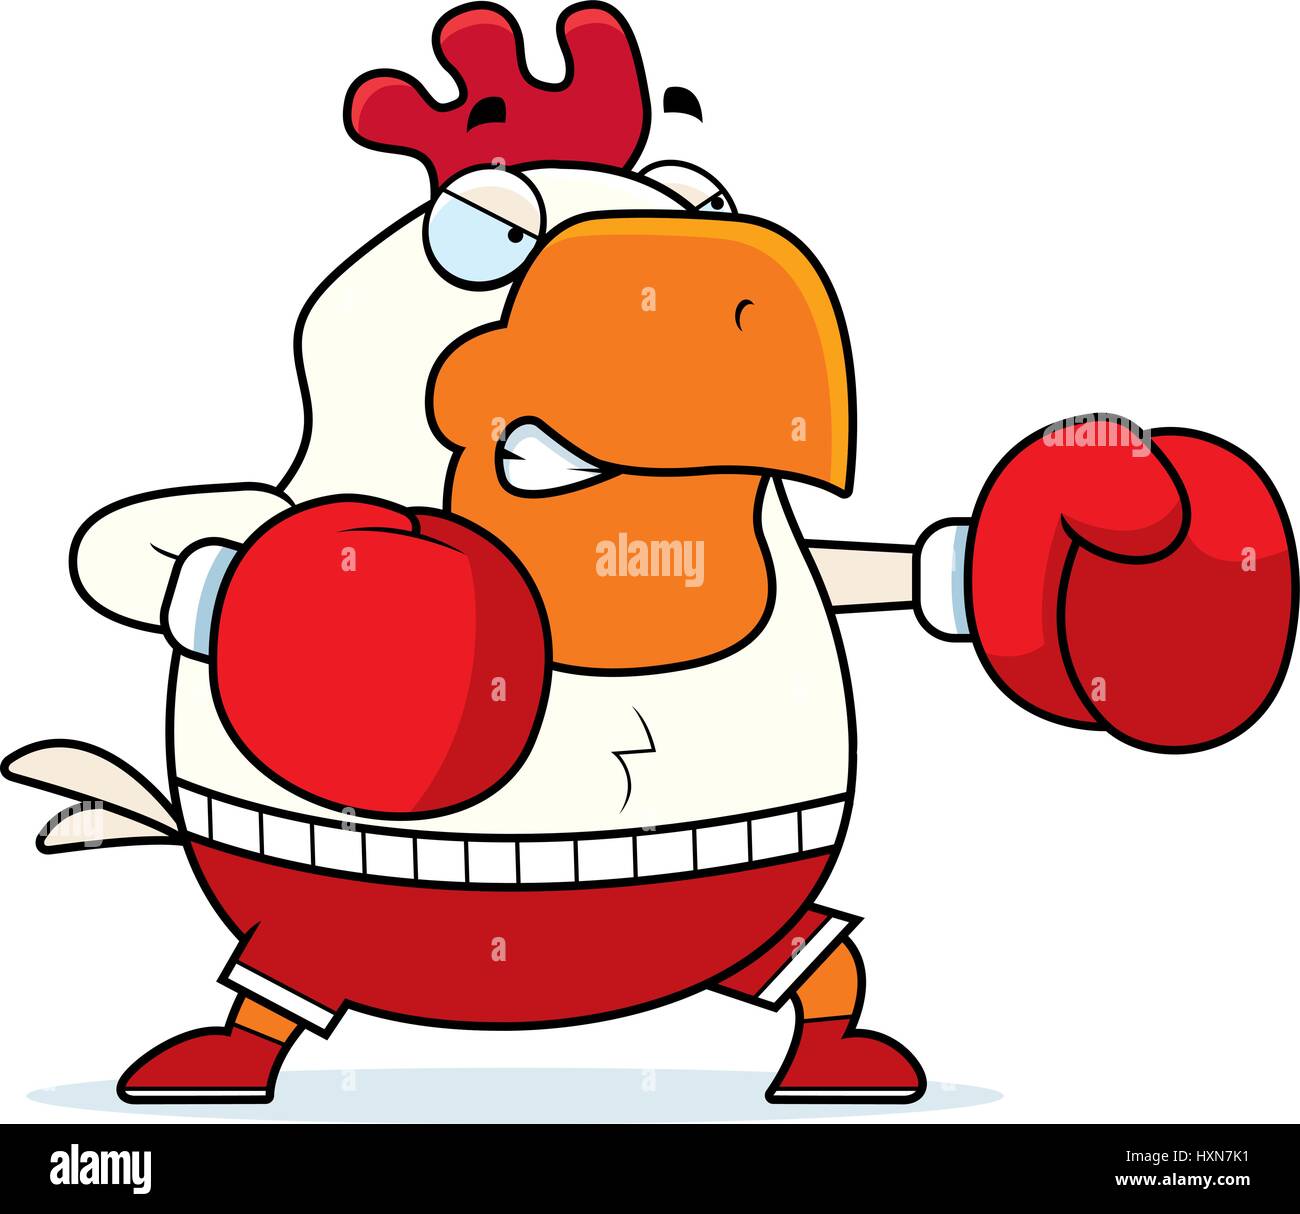 A cartoon illustration of a rooster punching with boxing gloves. Stock Vector